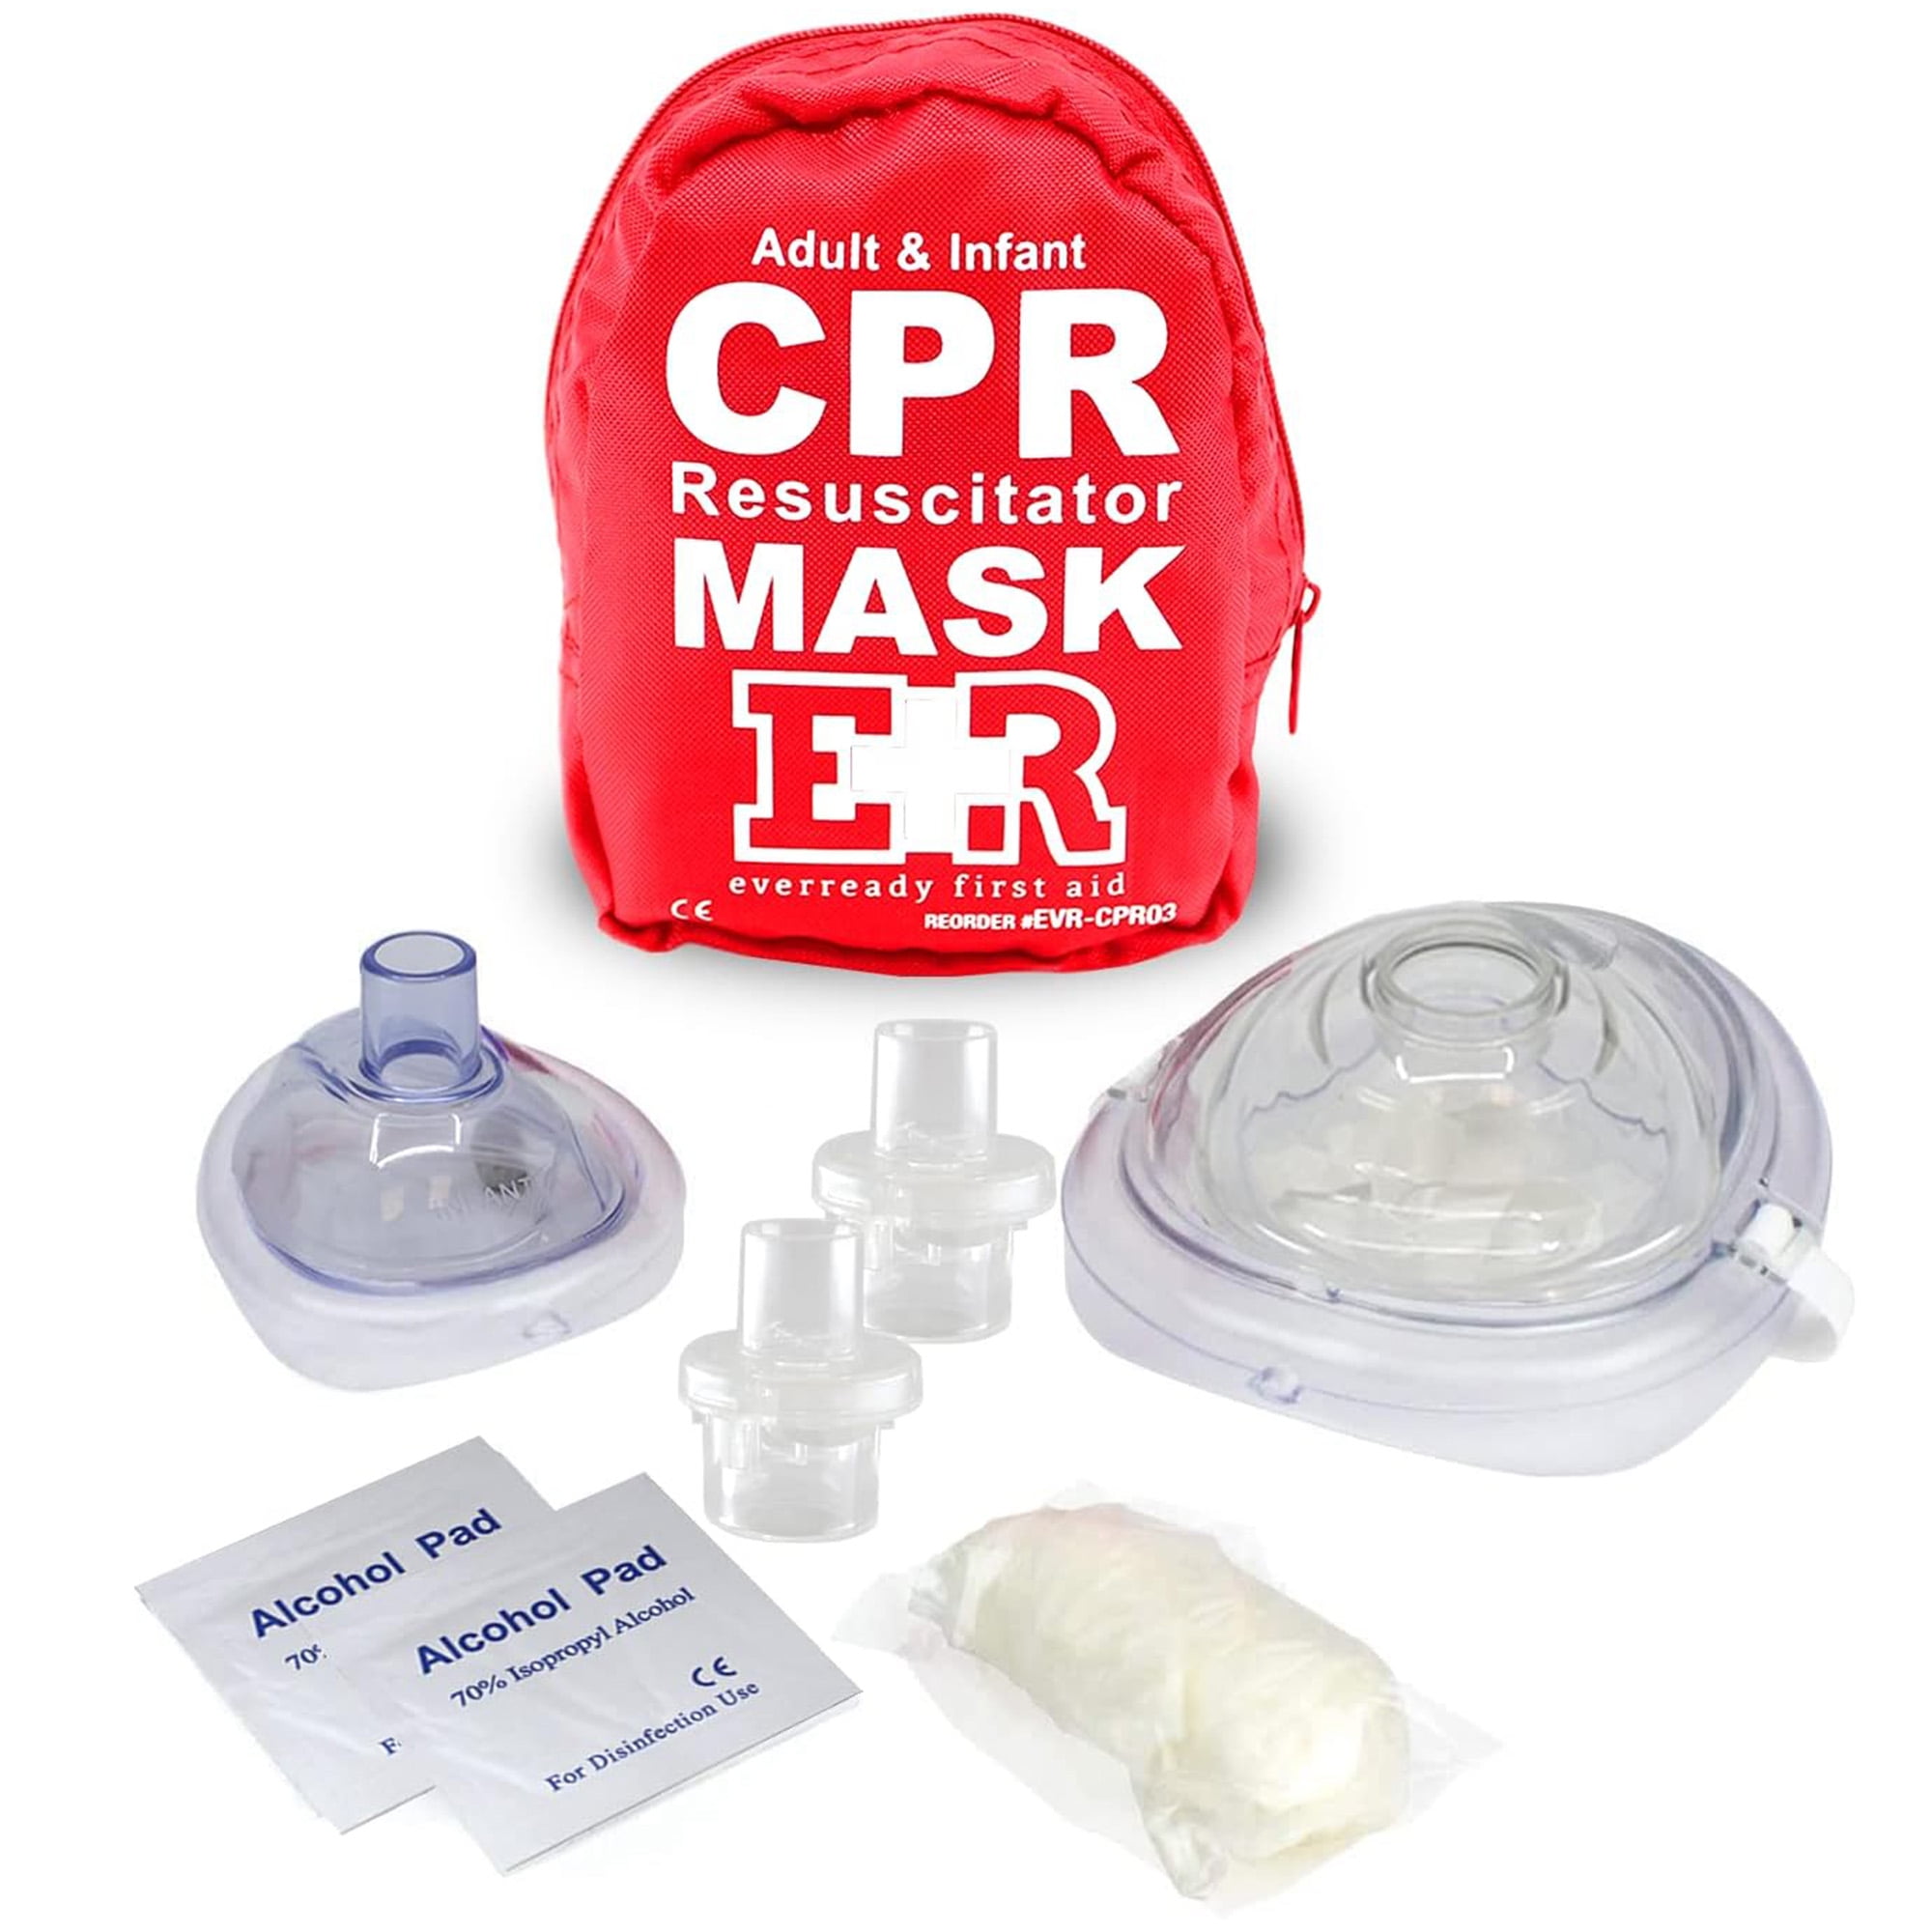 First Aid CPR Rescue Mask for Adult, Child, Infant Pocket Resuscitator, â€”  with Case, Gloves, Alcohol Prep Pads, One Way Valve CPR Face Shield Kit 